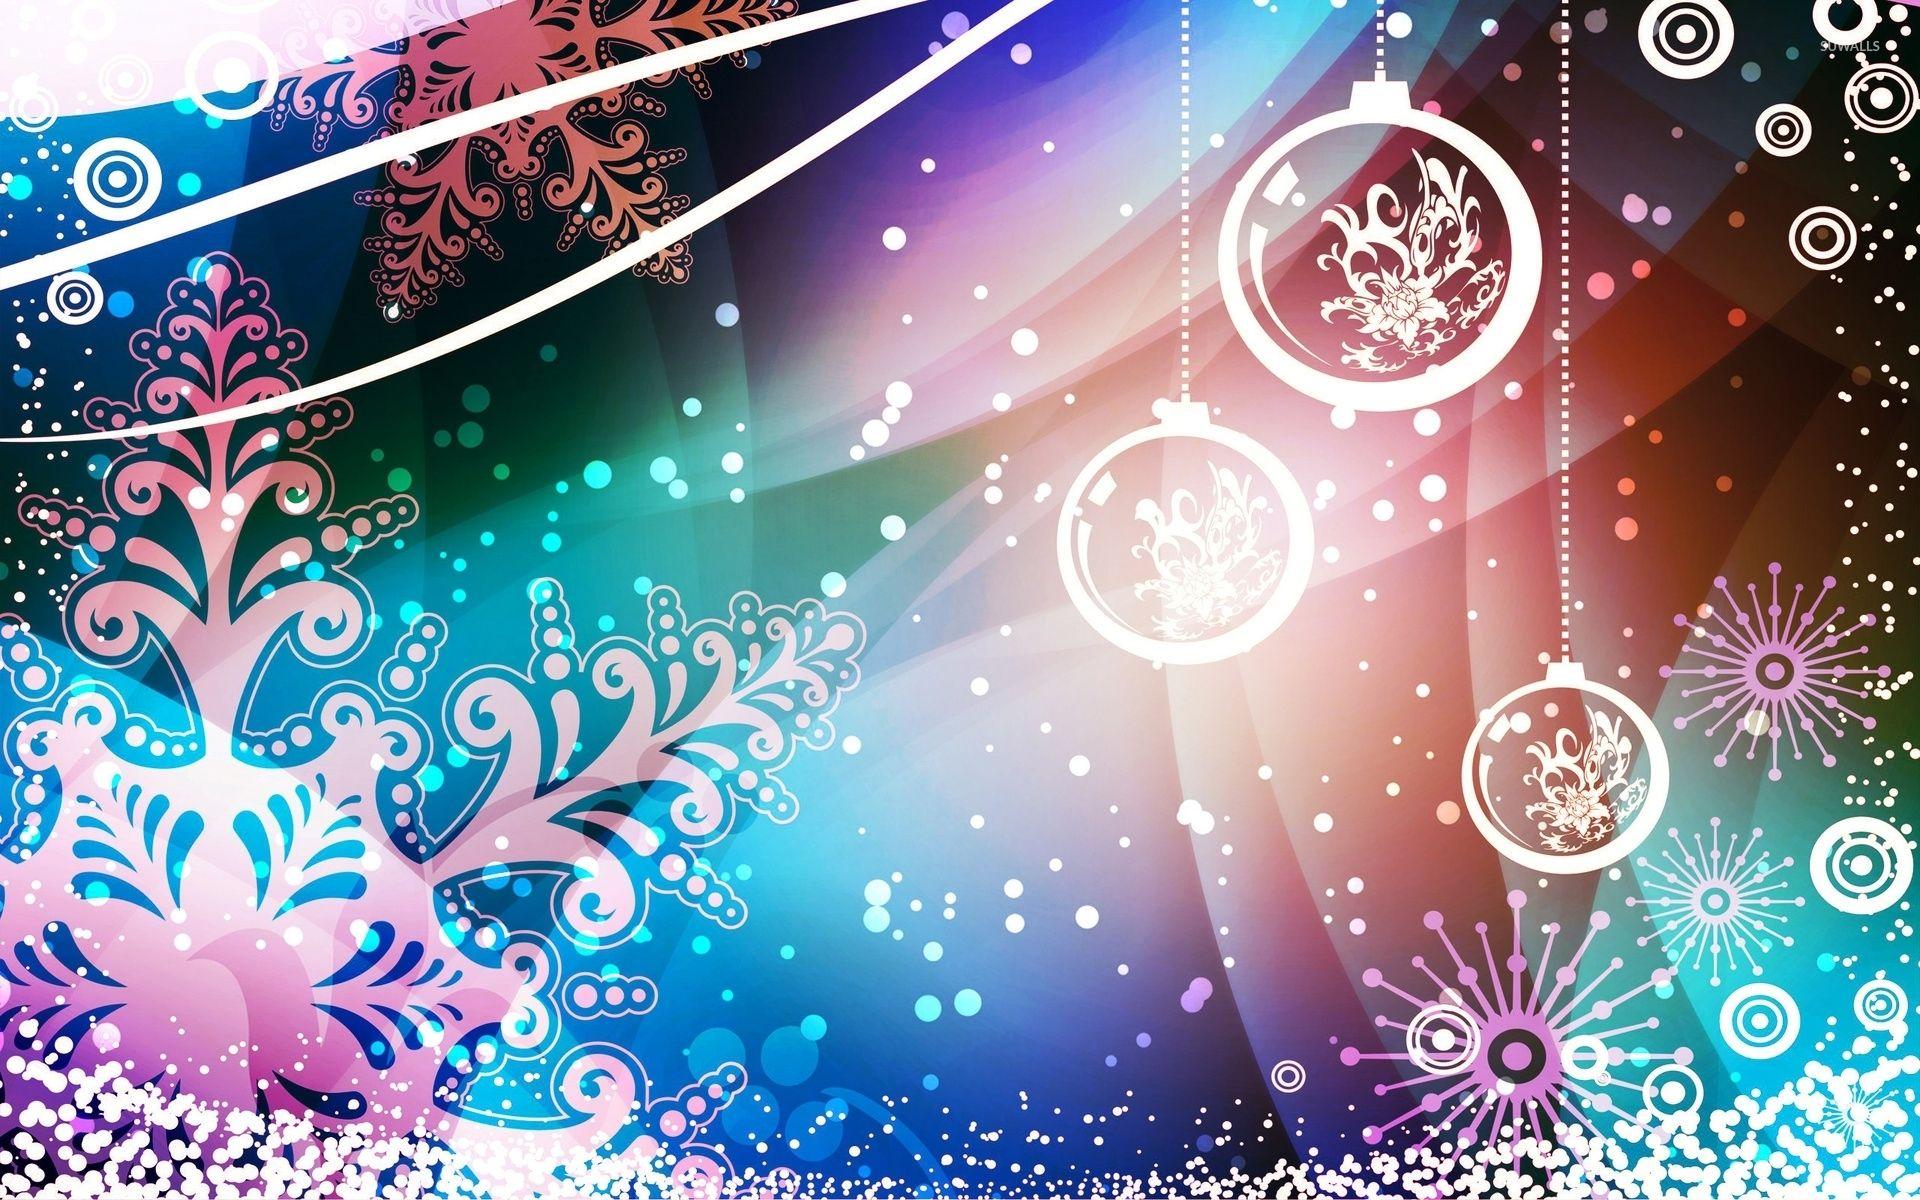 Snowflakes and baubles decorating the Christmas Eve wallpaper